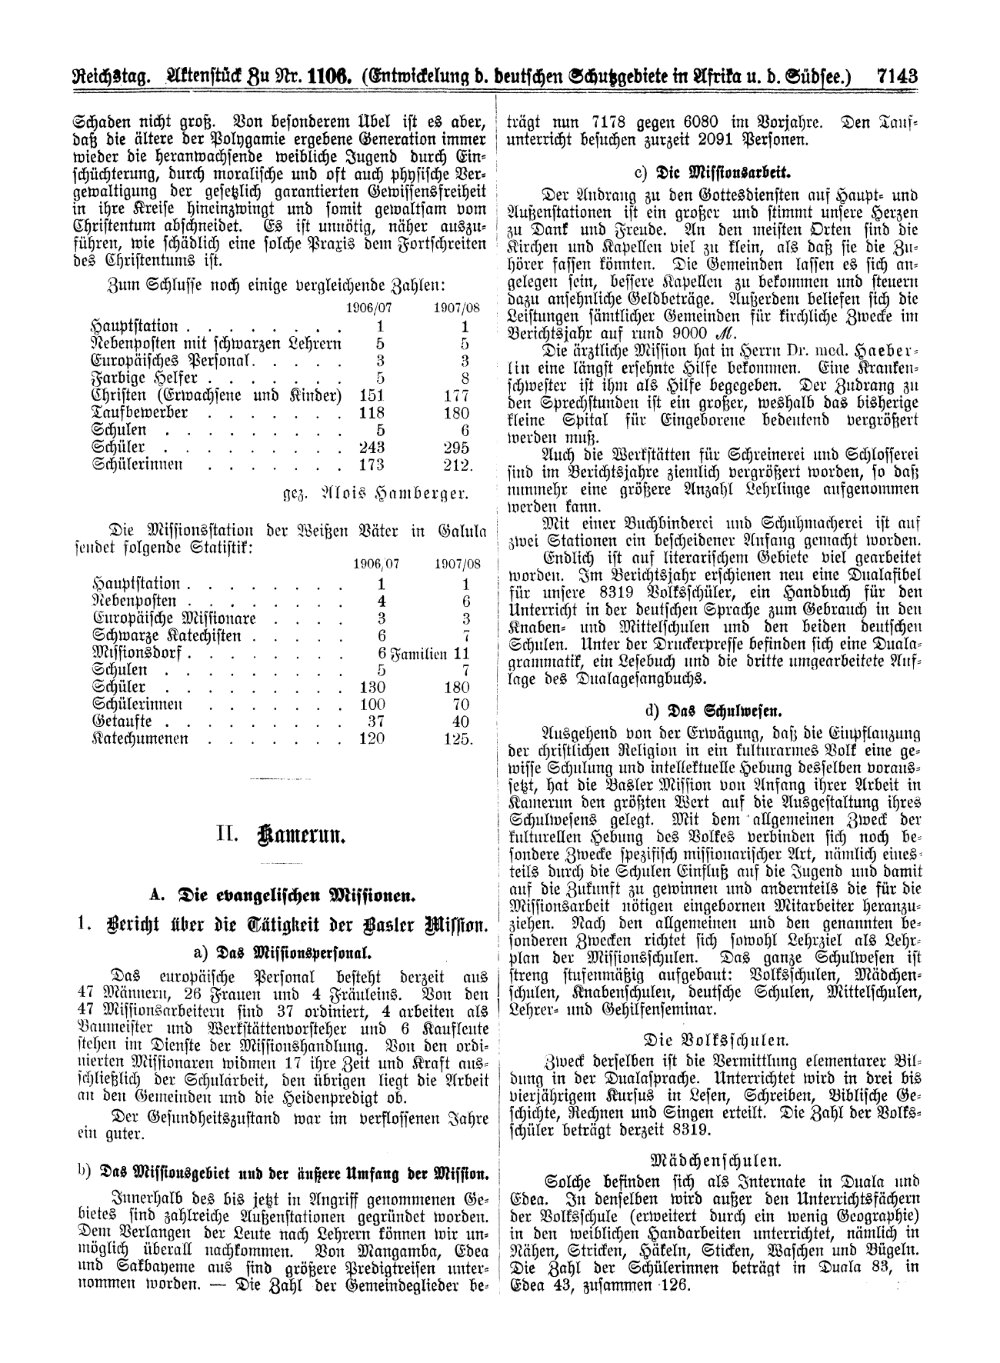 Scan of page 7143